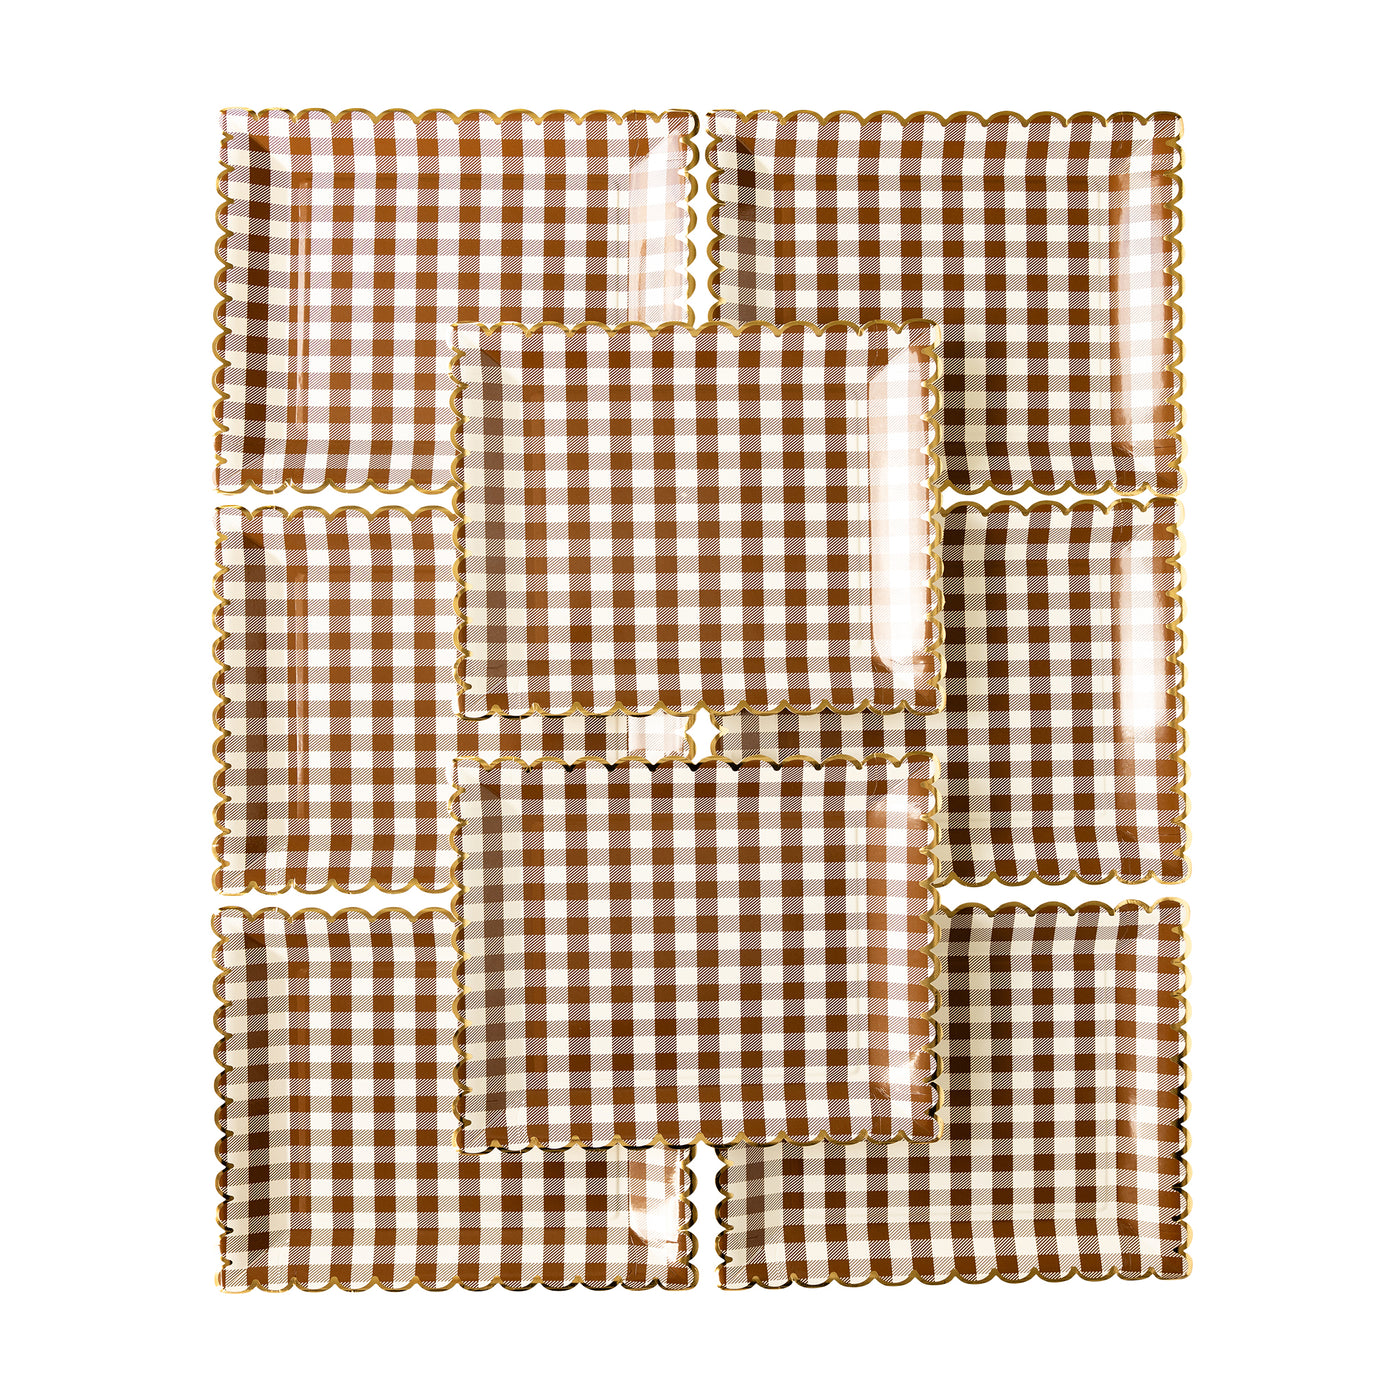 THP1142 - Brown Gingham Scalloped Plate